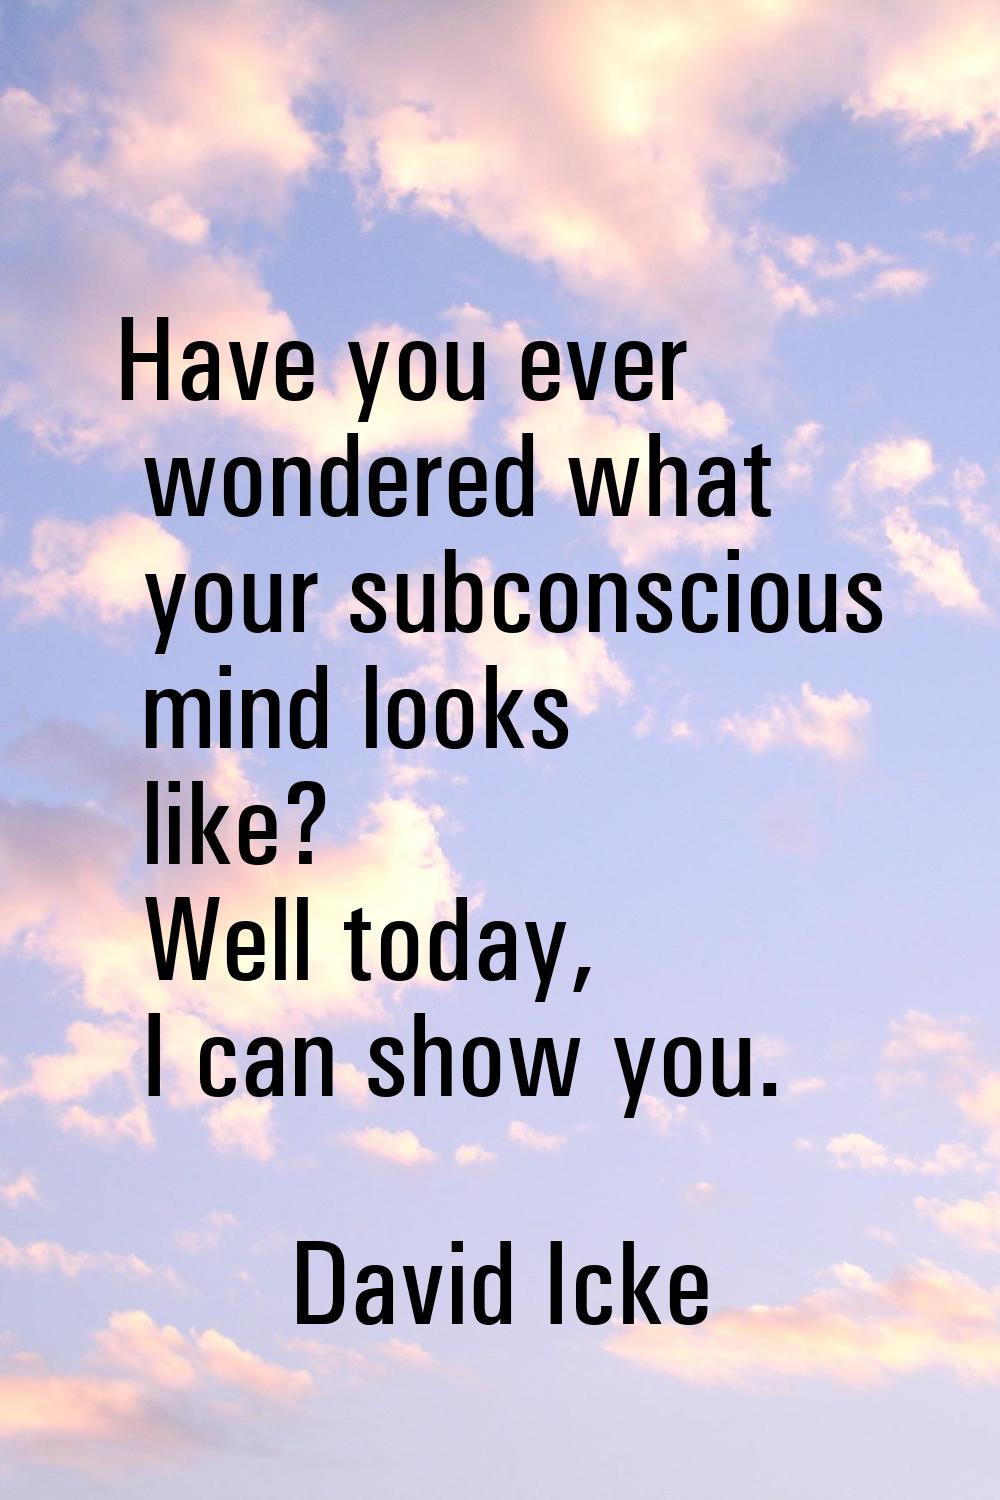 Have you ever wondered what your subconscious mind looks like? Well today, I can show you.